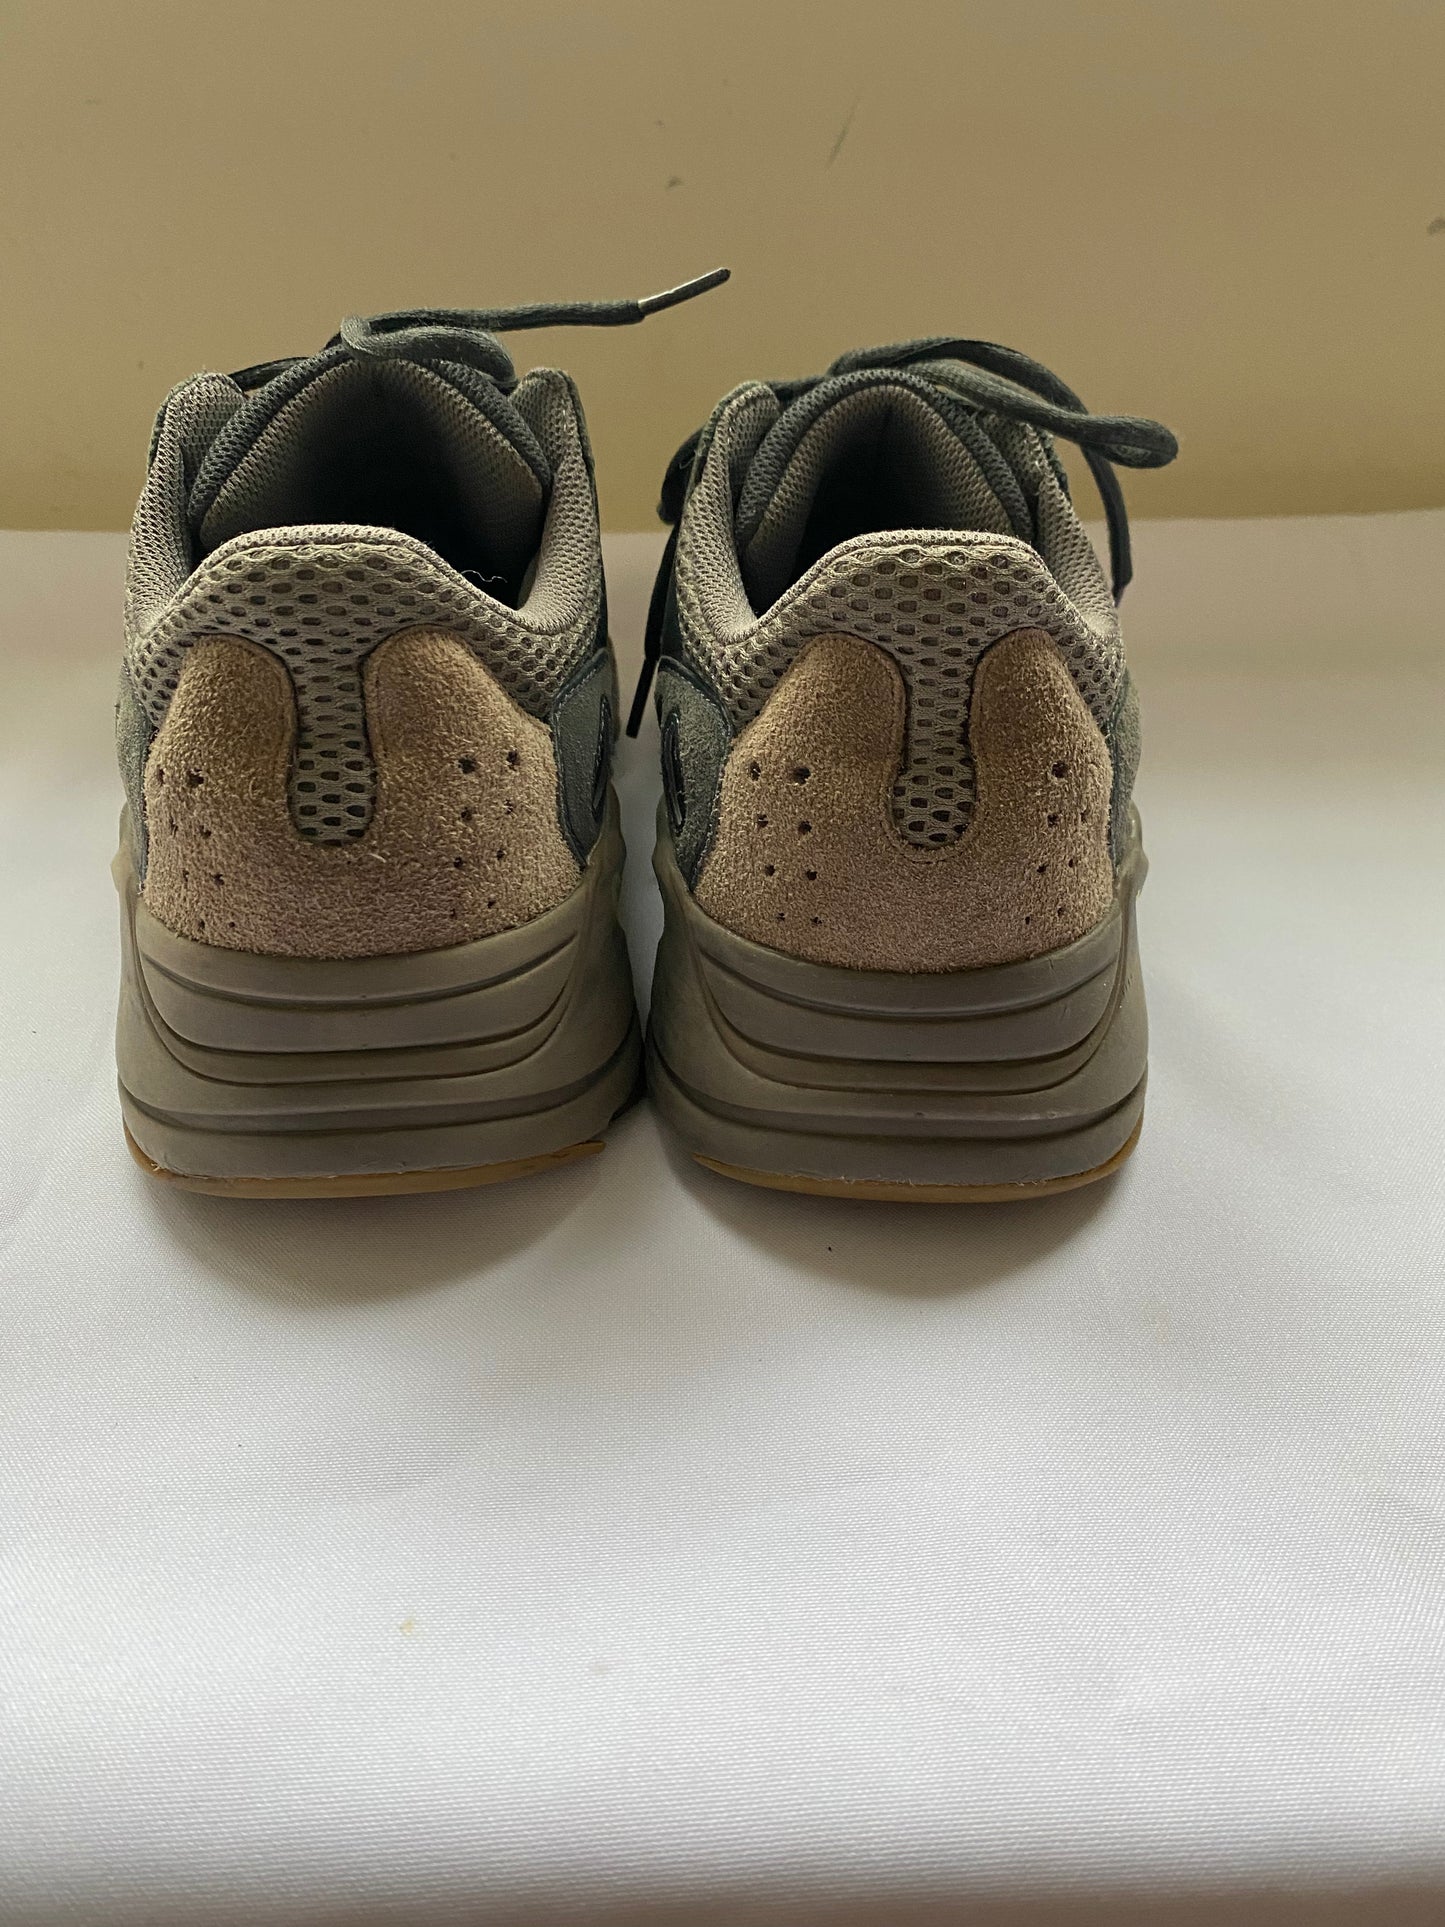 Adidas Yeezy Boost 700 Mauve Shoes (Size 11)